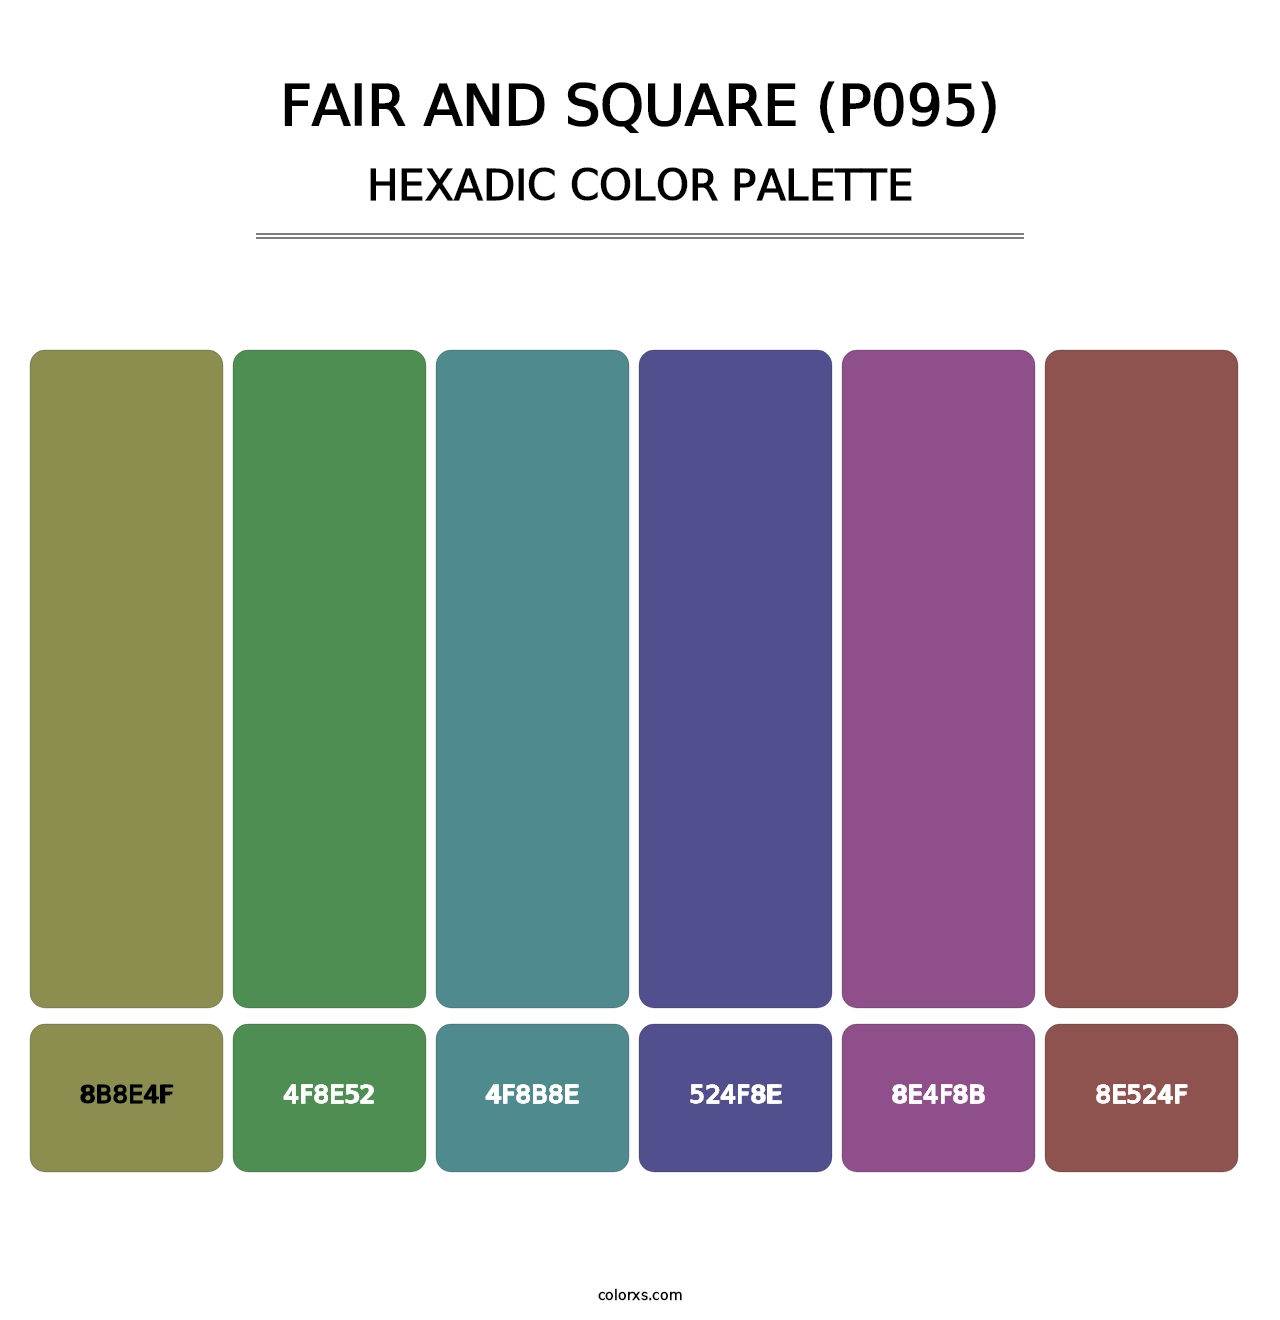 Fair and Square (P095) - Hexadic Color Palette